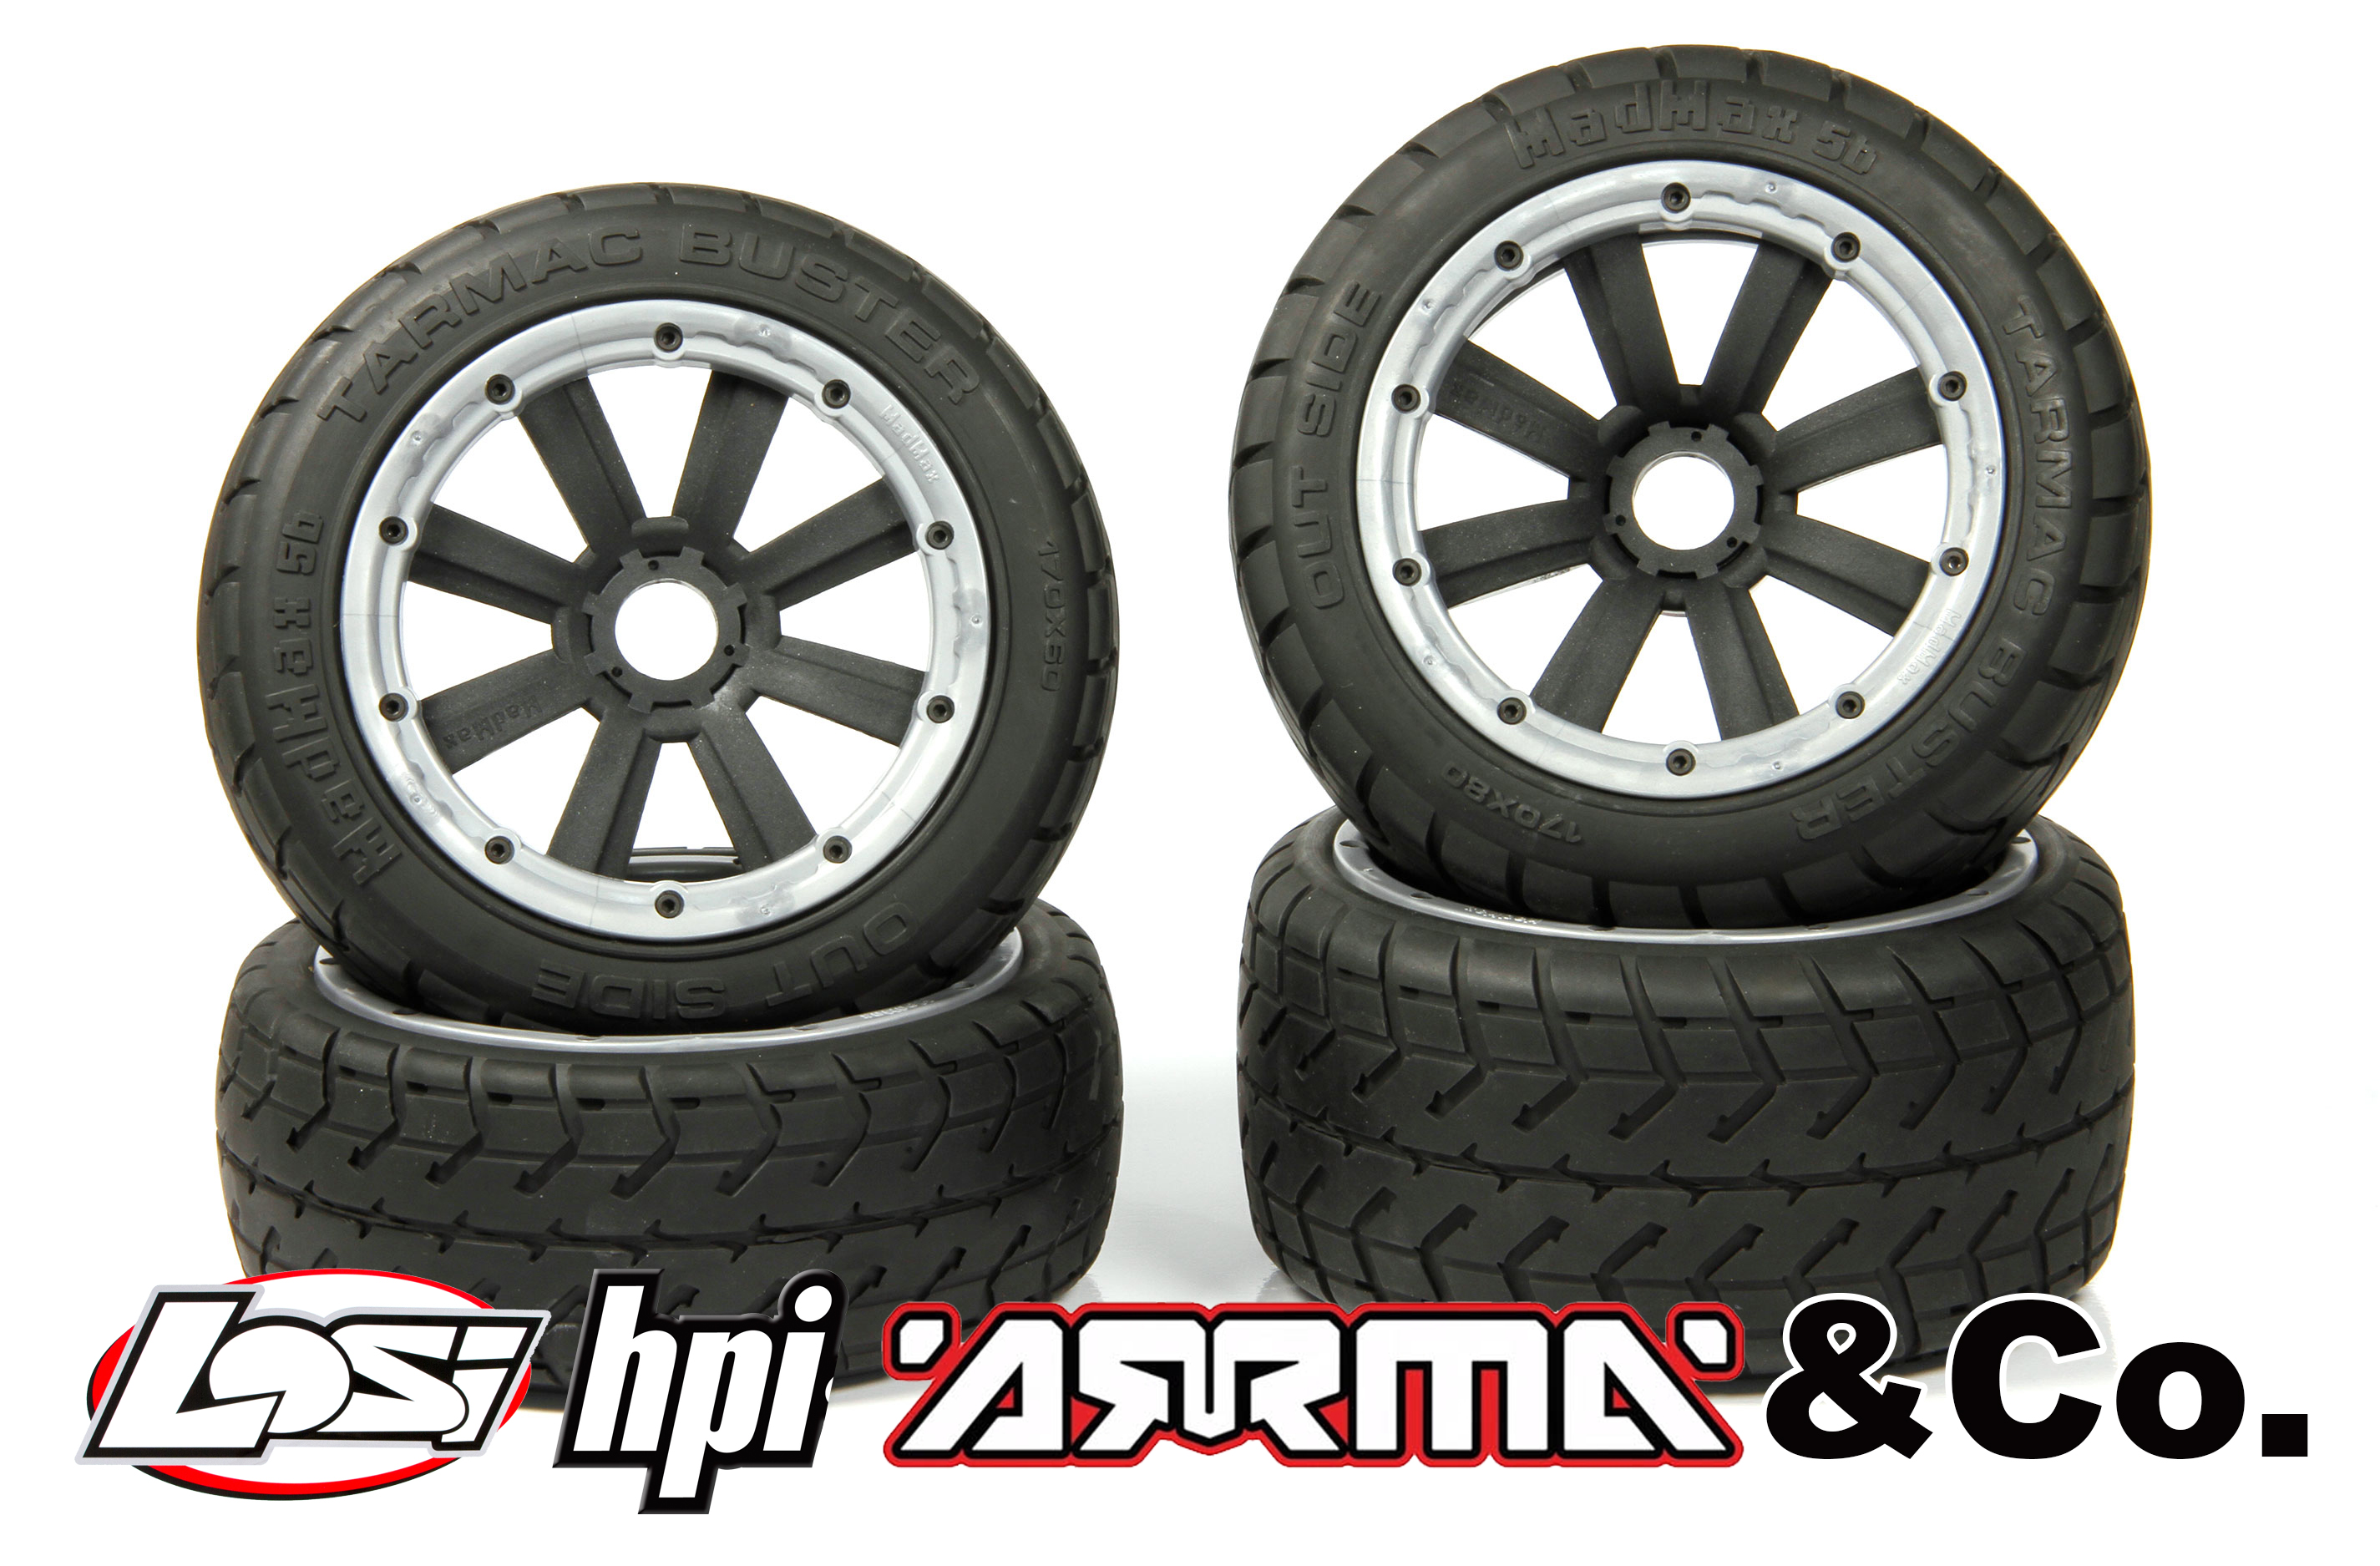 y1405/01 MadMax TARMAC BUSTER 170x80/x60 for HPI + Losi (24 mm hex drive) Offer